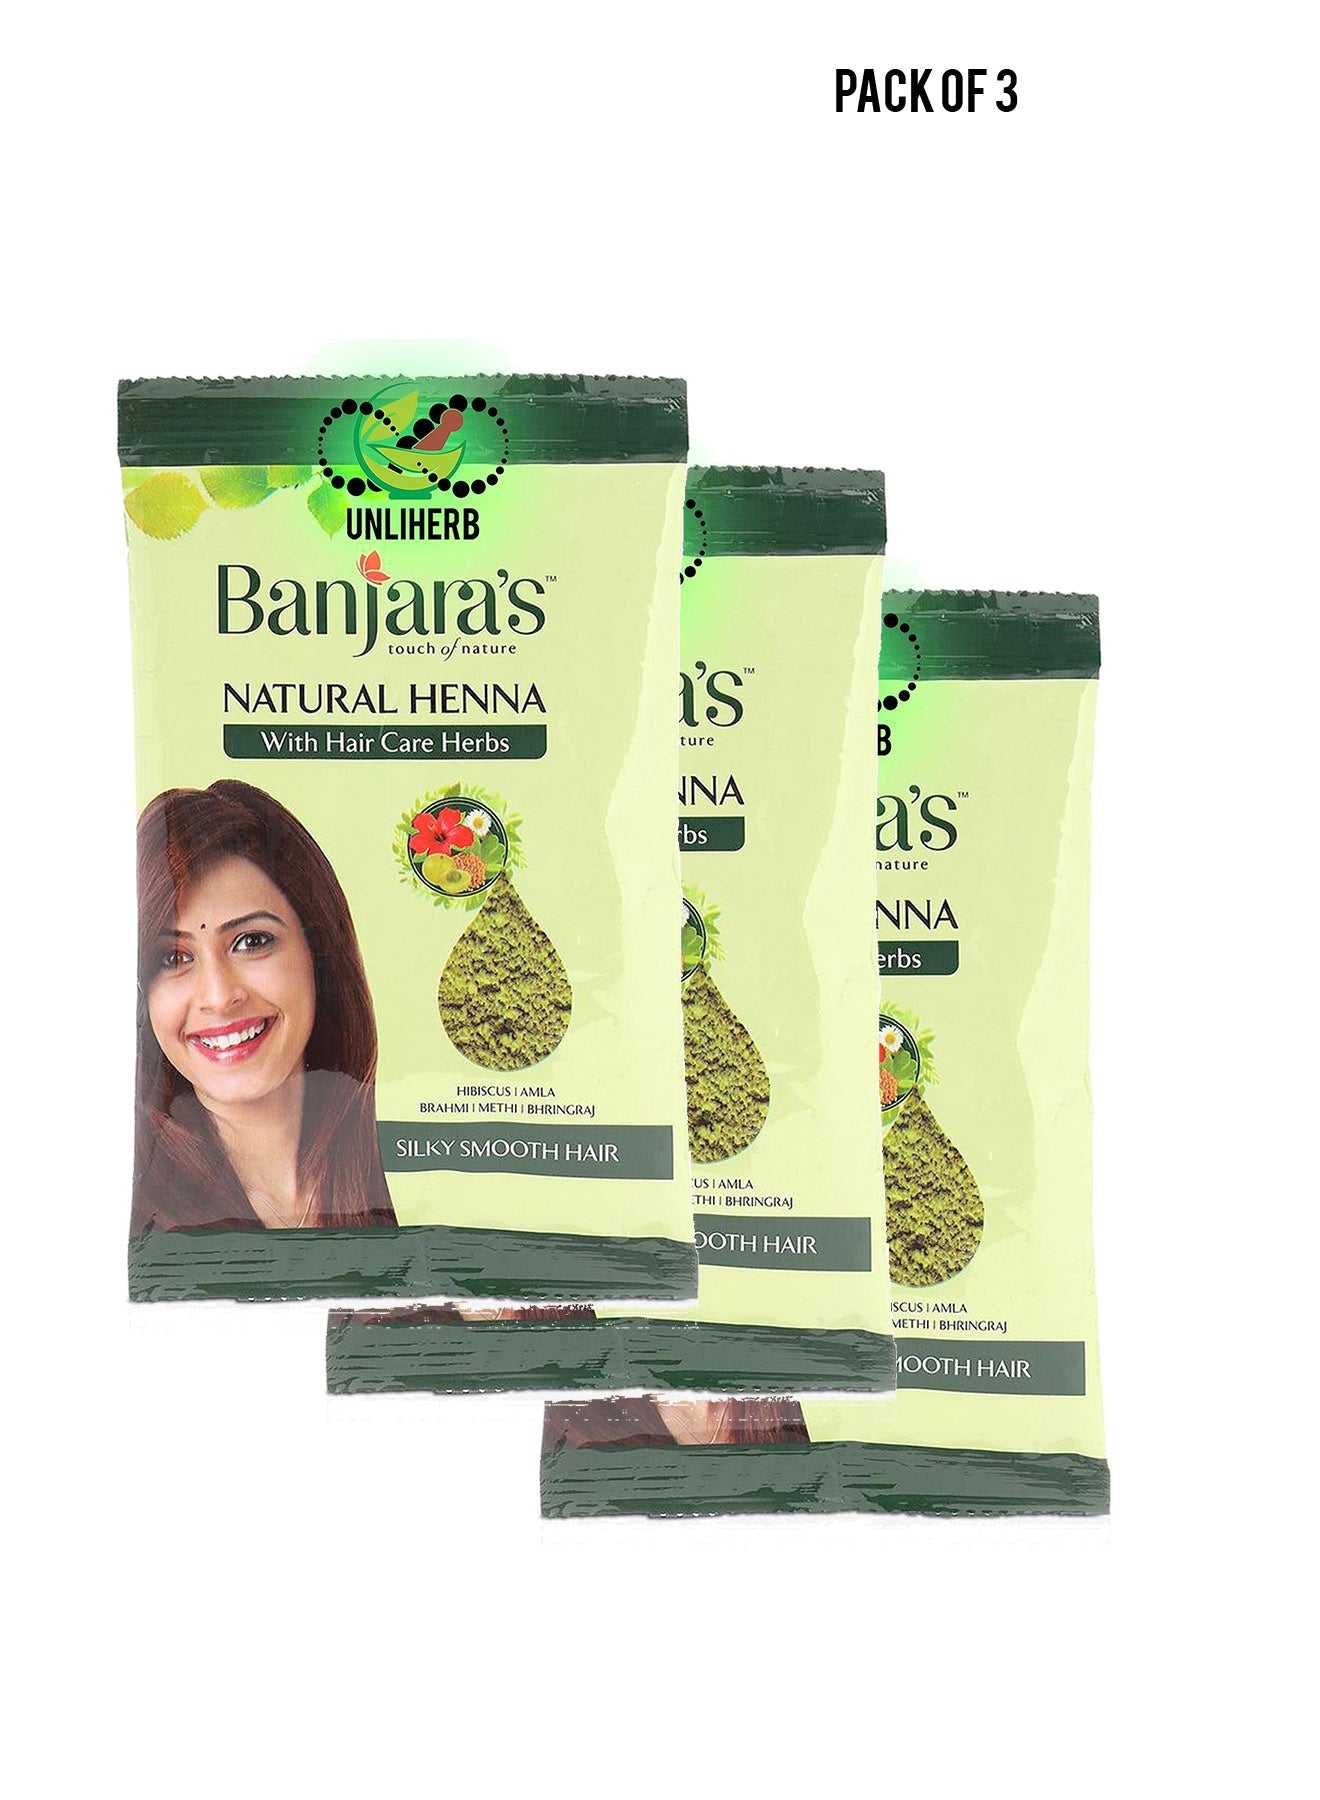 Banjaras Natural Henna with Hair Care Herbs pouch 100g Value Pack of 3 